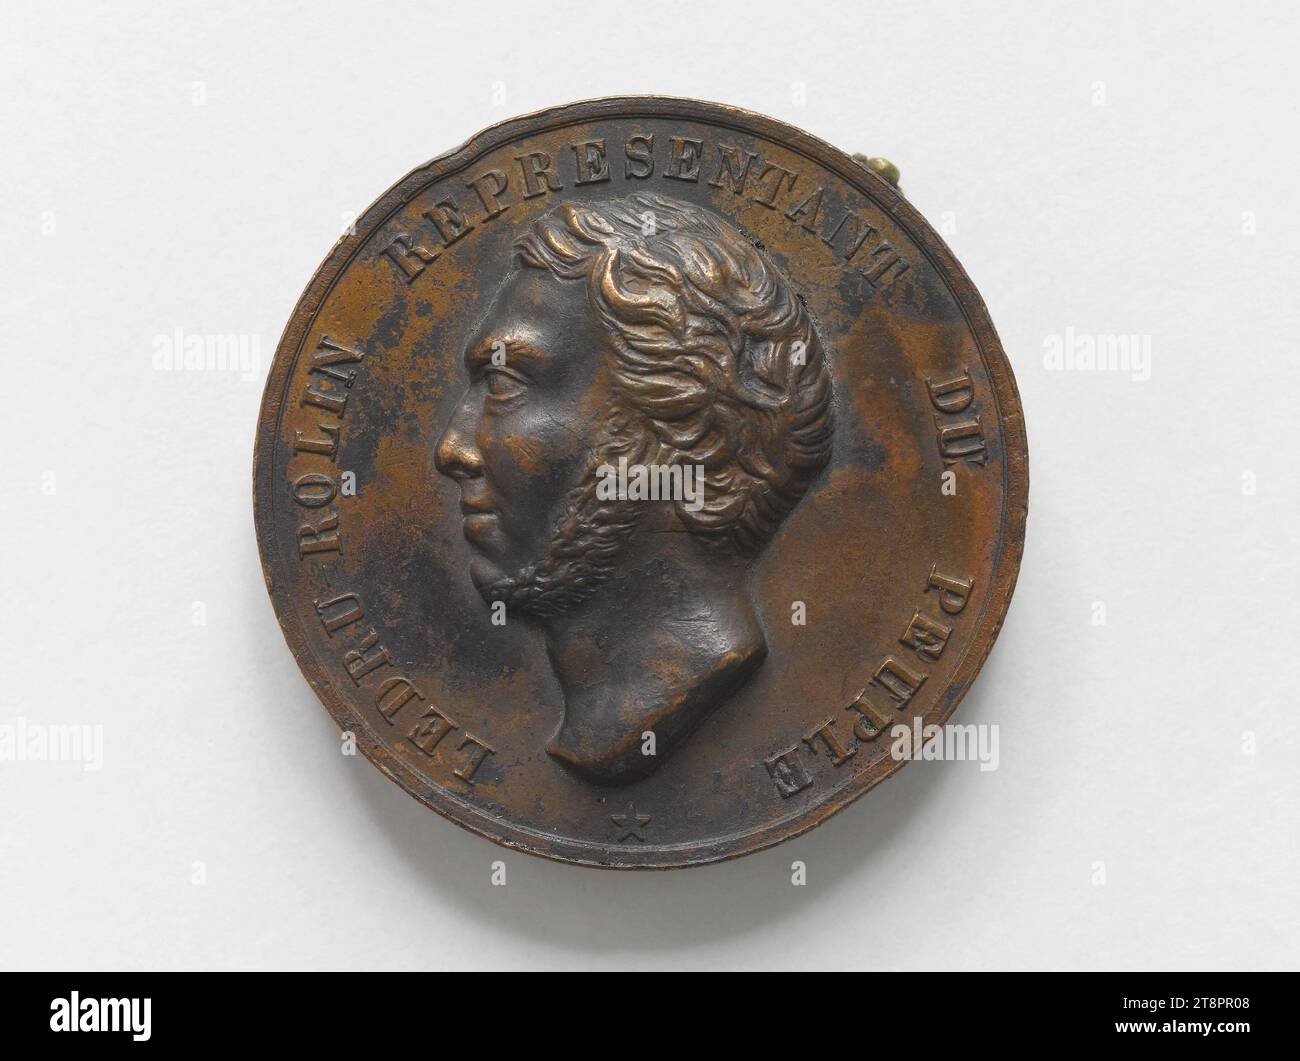 Alexandre-Auguste Ledru-Rollin (1807-1874), French lawyer and politician, 1848, Anonymous, Medal Engraver, Array, Numismatic, Medal, Size - Work: Diameter: 3.5 cm, Weight (type size): 43.29 g Stock Photo